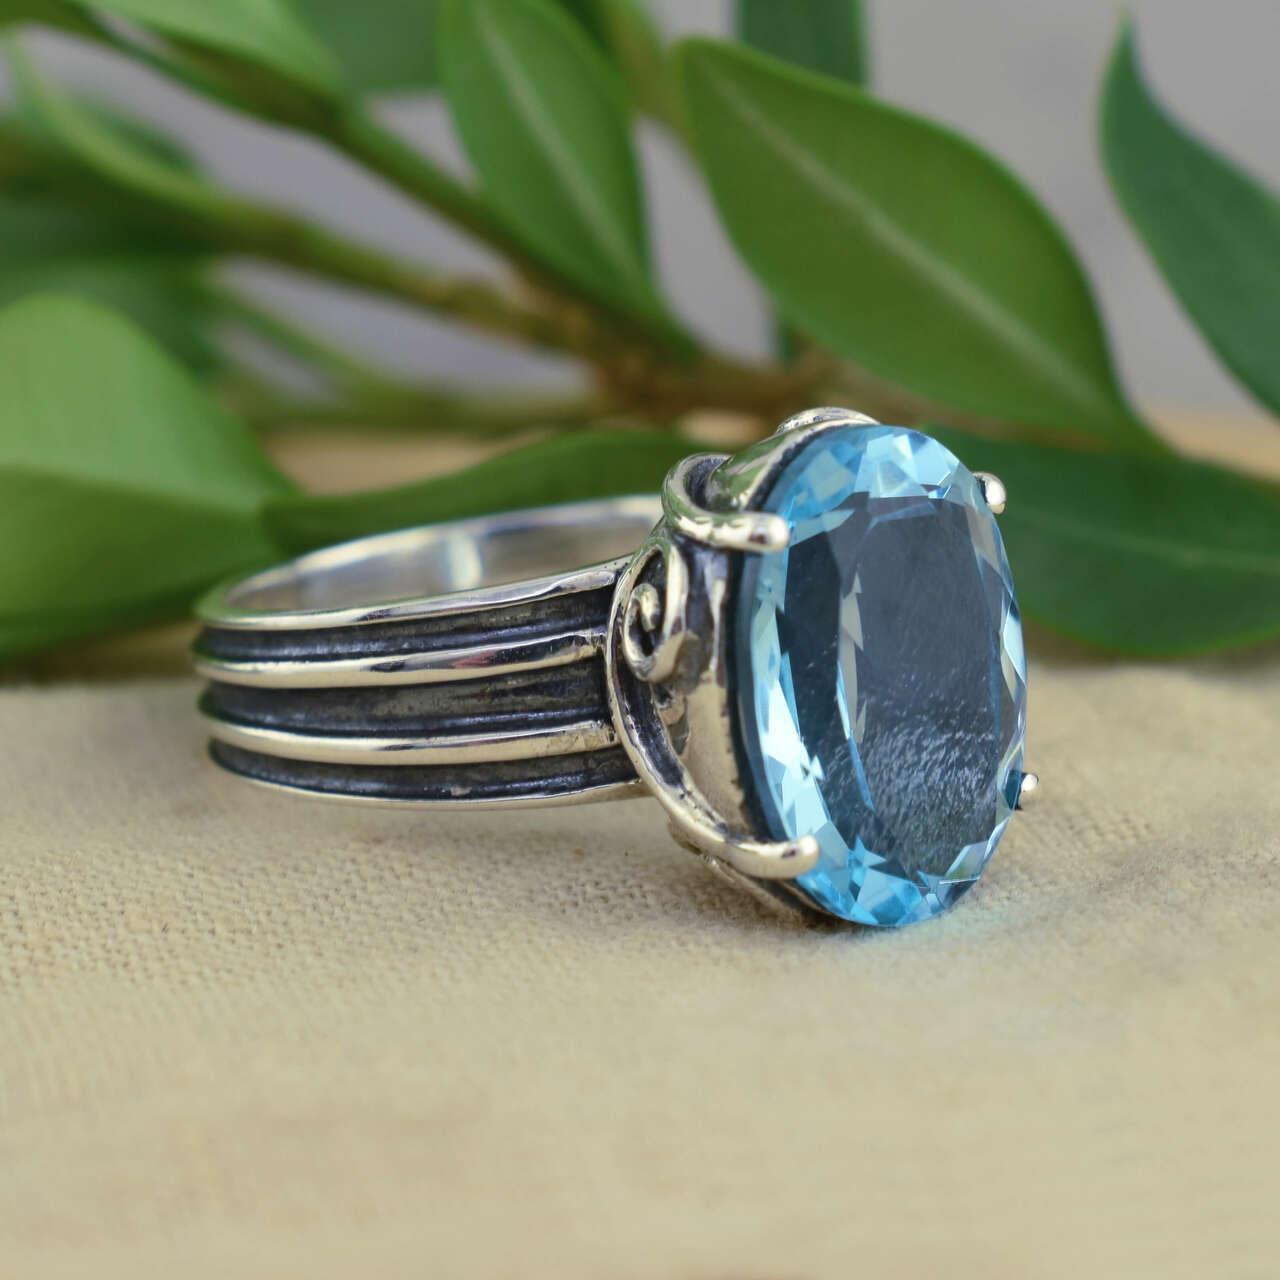 .925 sterling silver ring with center blue CZ